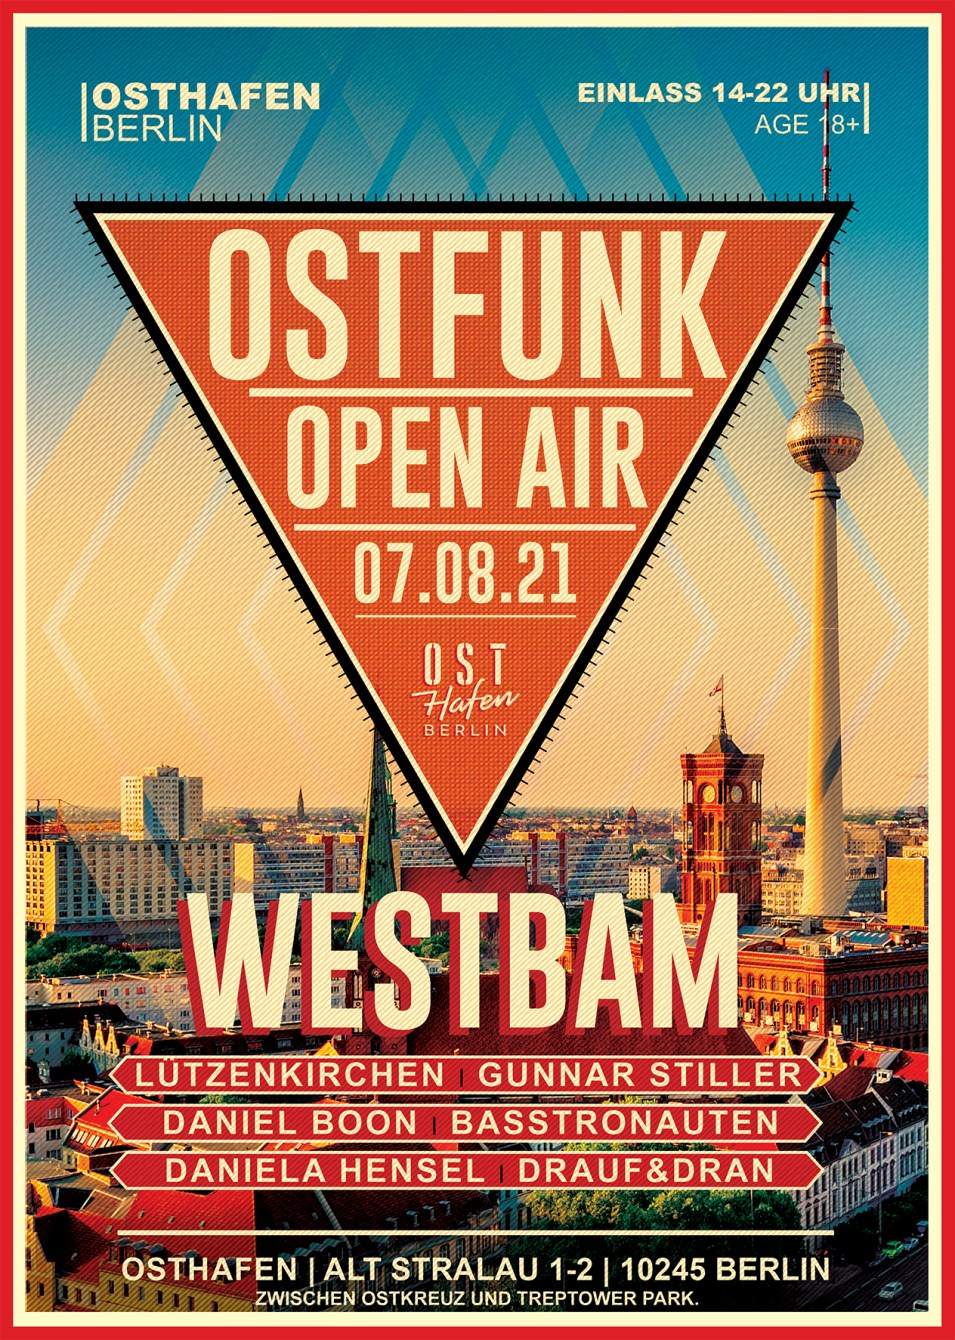 Ostfunk Open Air w./ Westbam and Friends - Página frontal